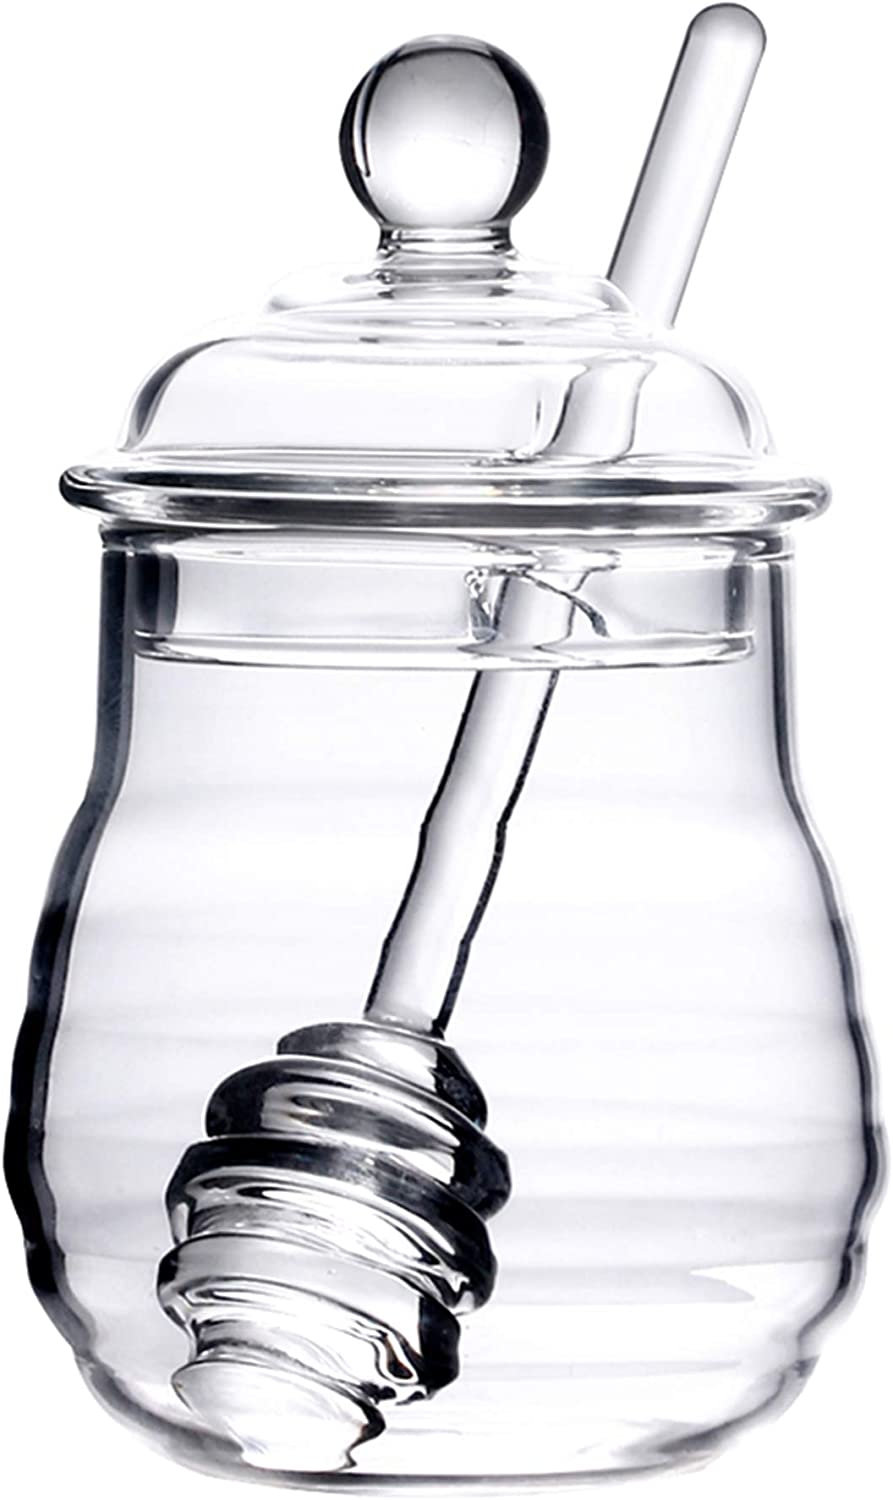 Primary image for Honey Jar with Dipper and Lid Glass - Heat-Resistant 10 Oz